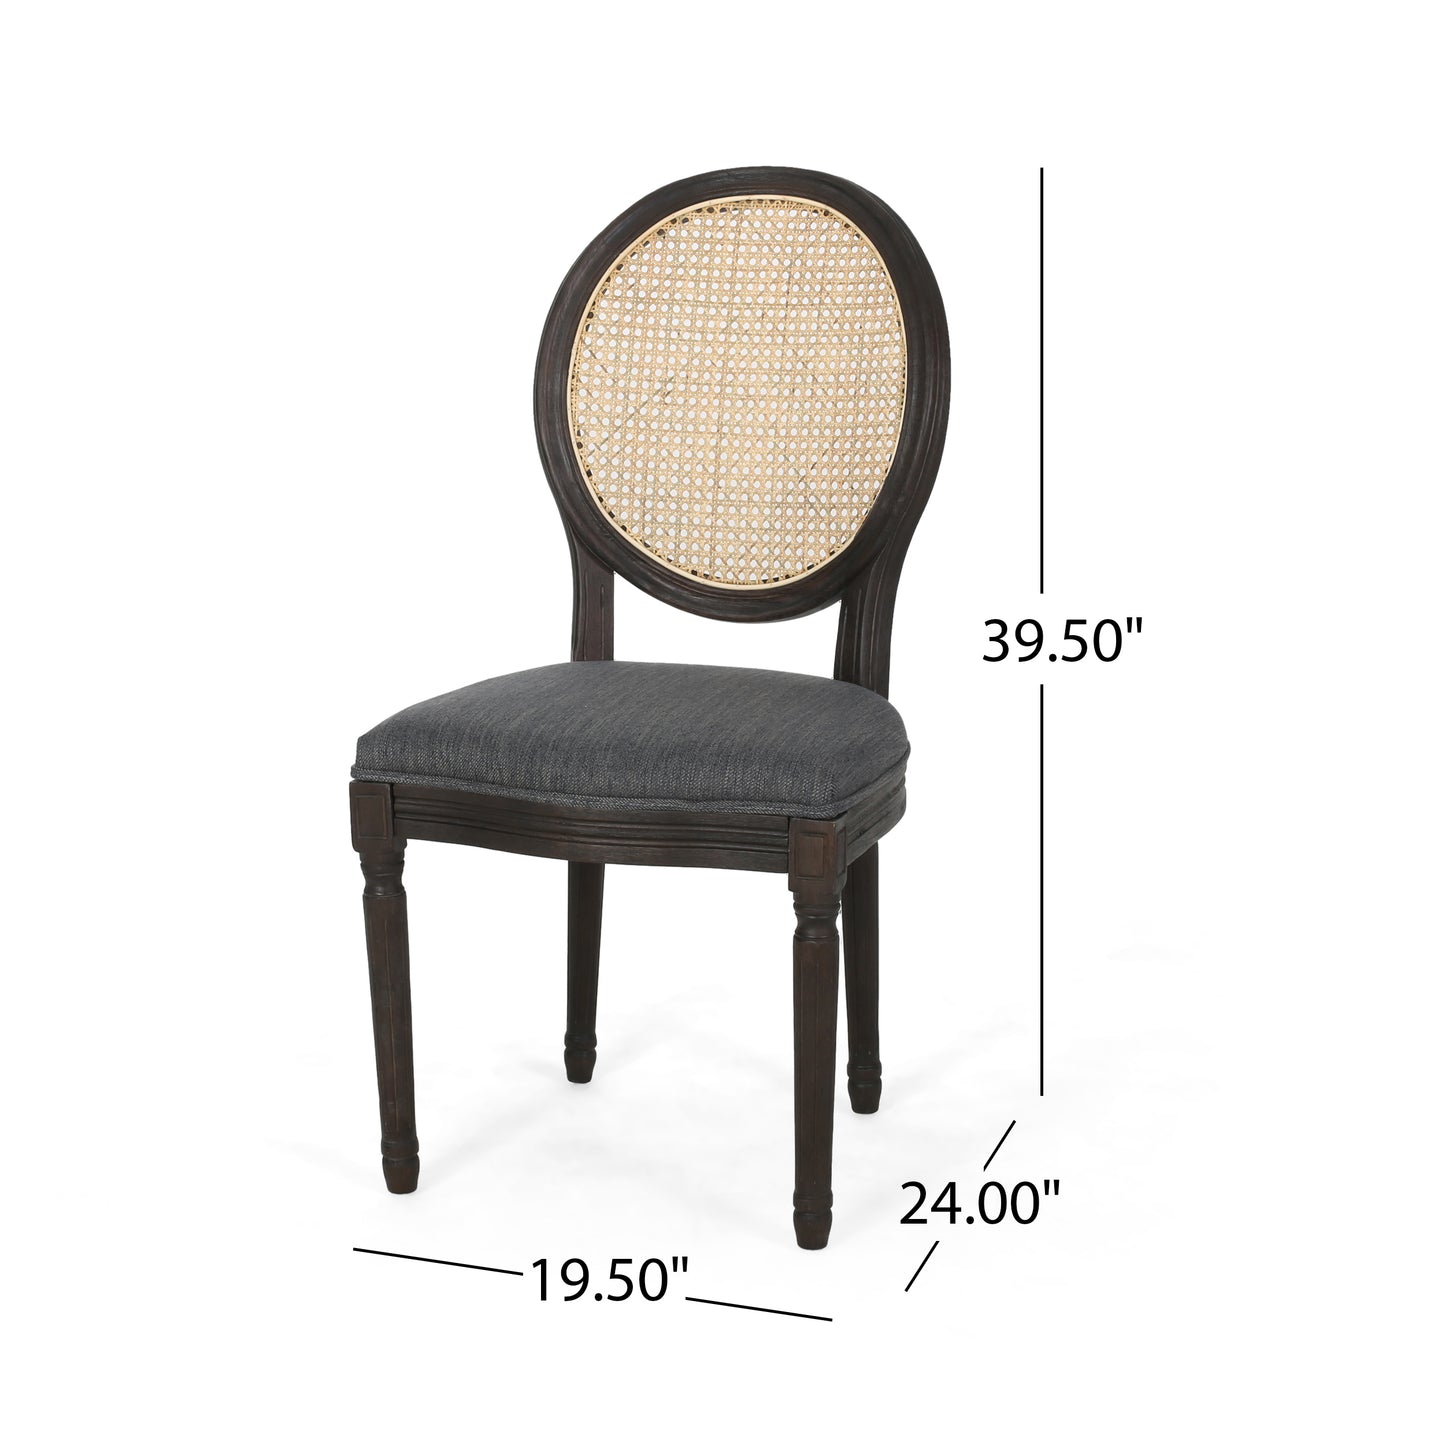 Laney French Style Oval Cane Back Dining Chairs (Set of 2)